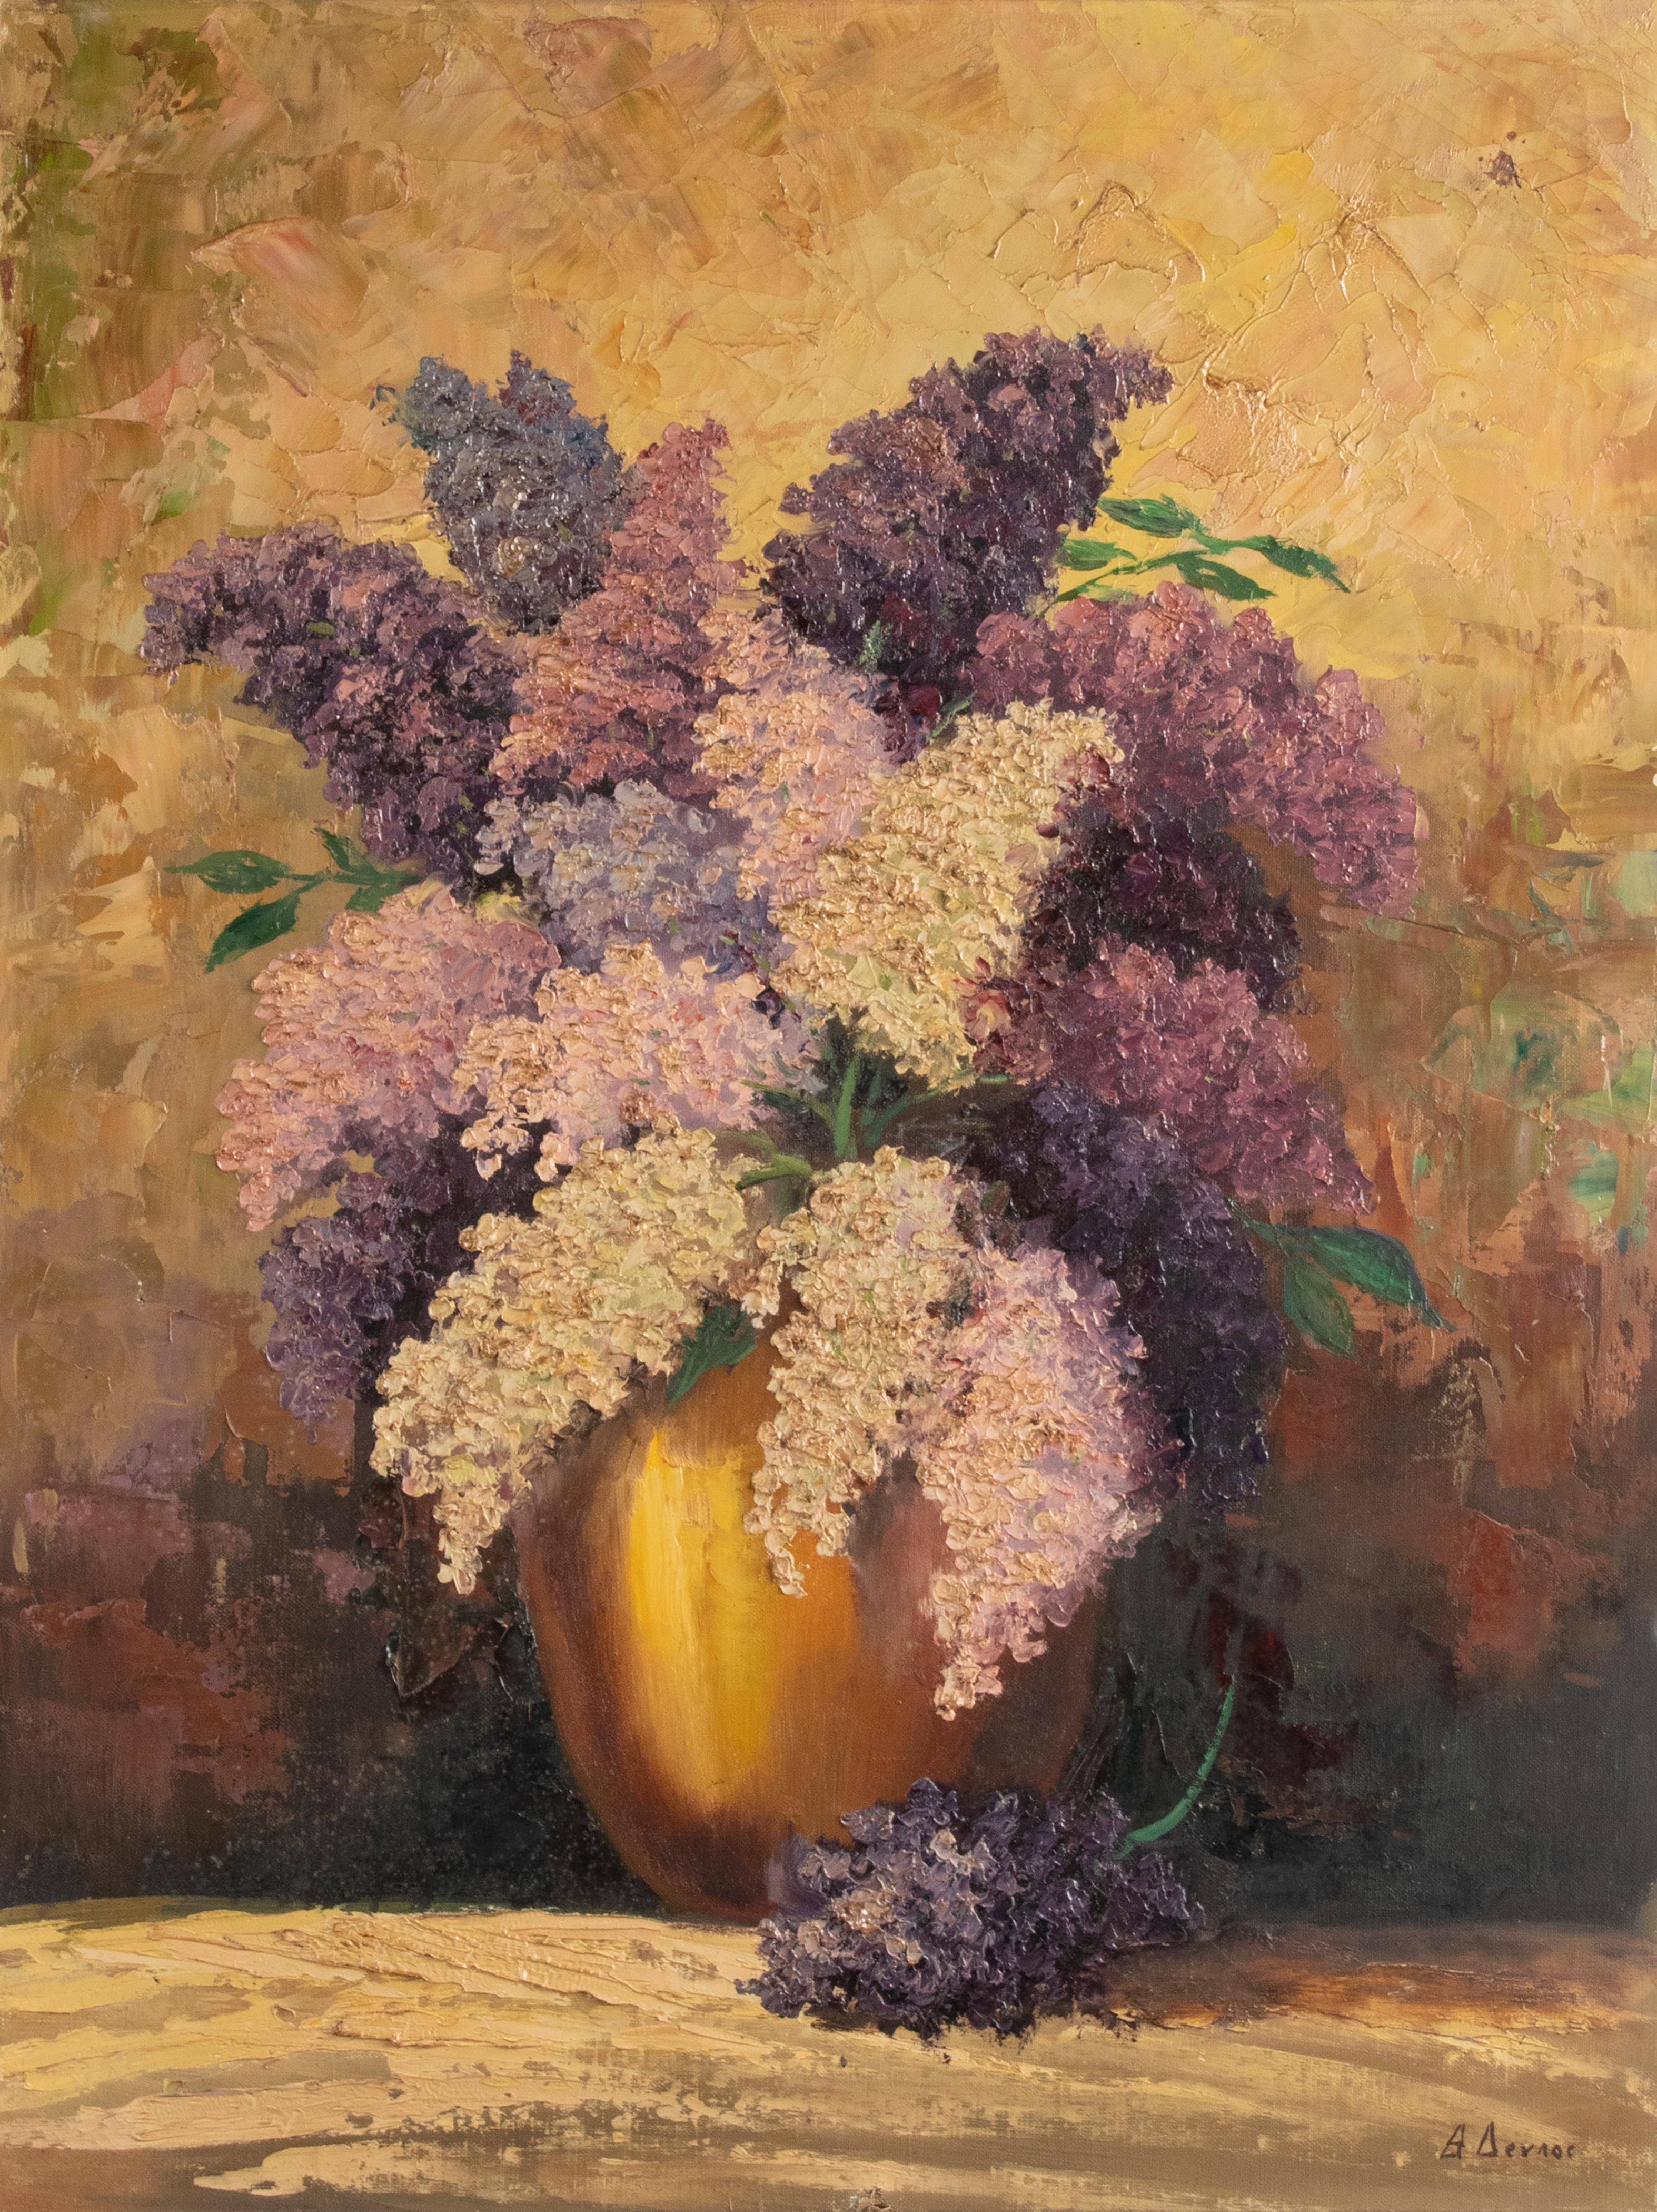 Decorative old painting, oil on canvas, of a flower still life with lilacs. The purple and pink colors of the flowers reflect nicely with the gold colored vase and the atmospheric background. The painting is painted with a somewhat coarse touch, the